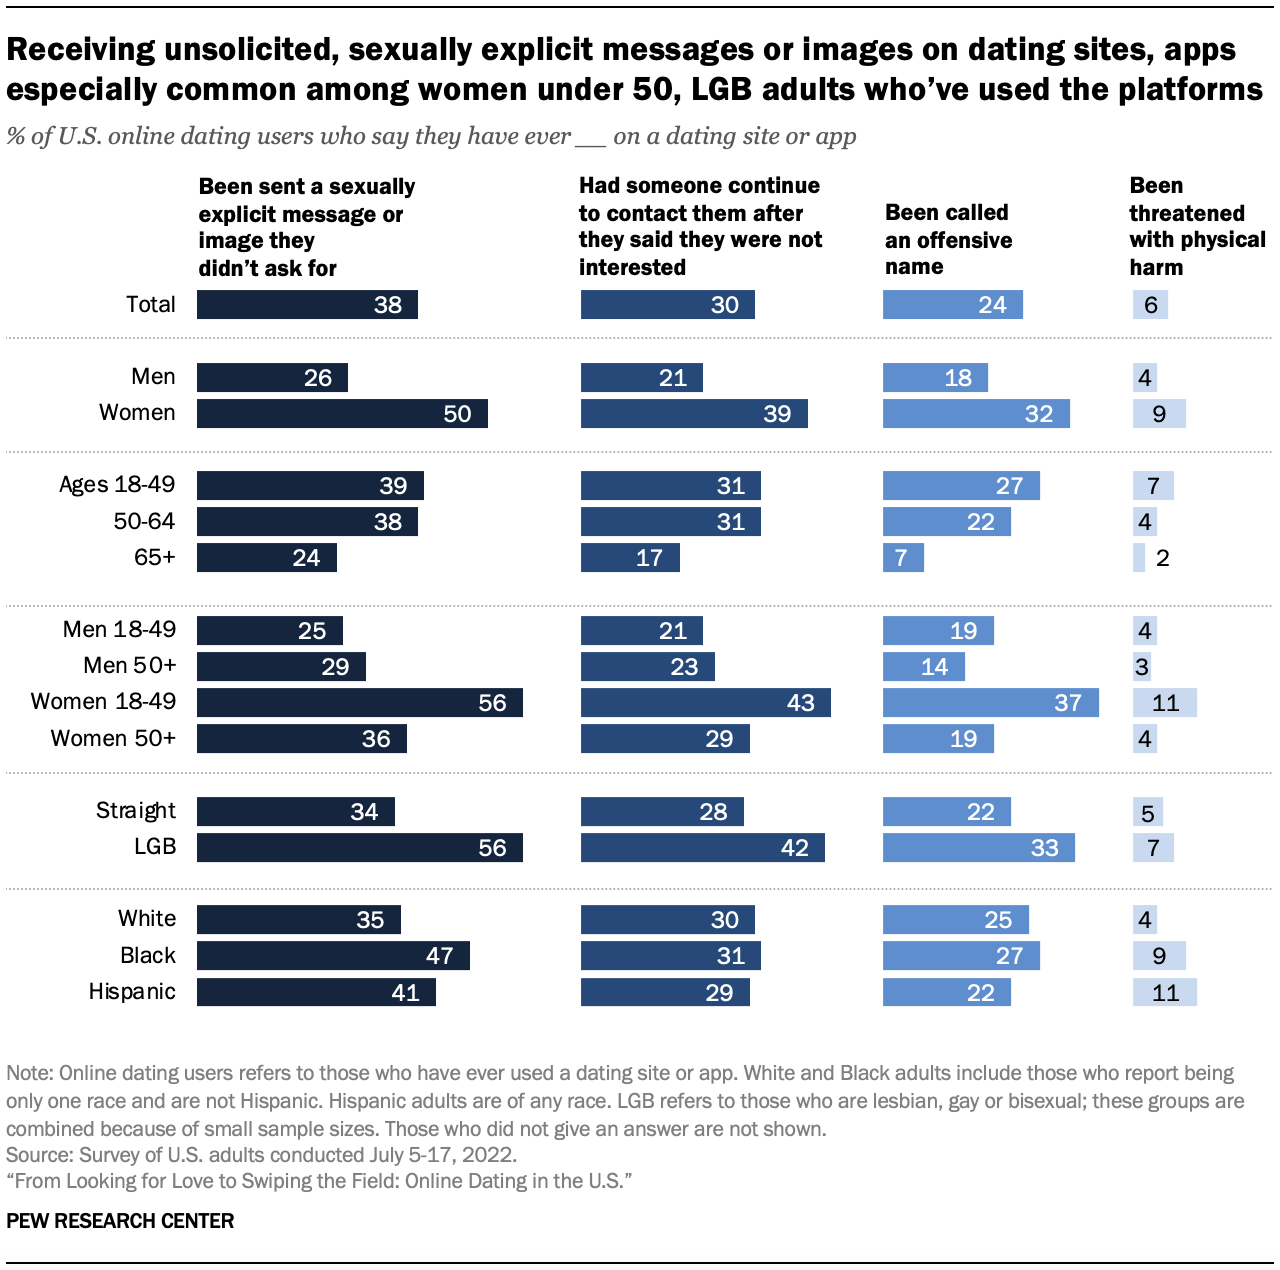 Receiving unsolicited, sexually explicit messages or images on dating sites, apps especially common among women under 50, LGB adults who’ve used the platforms